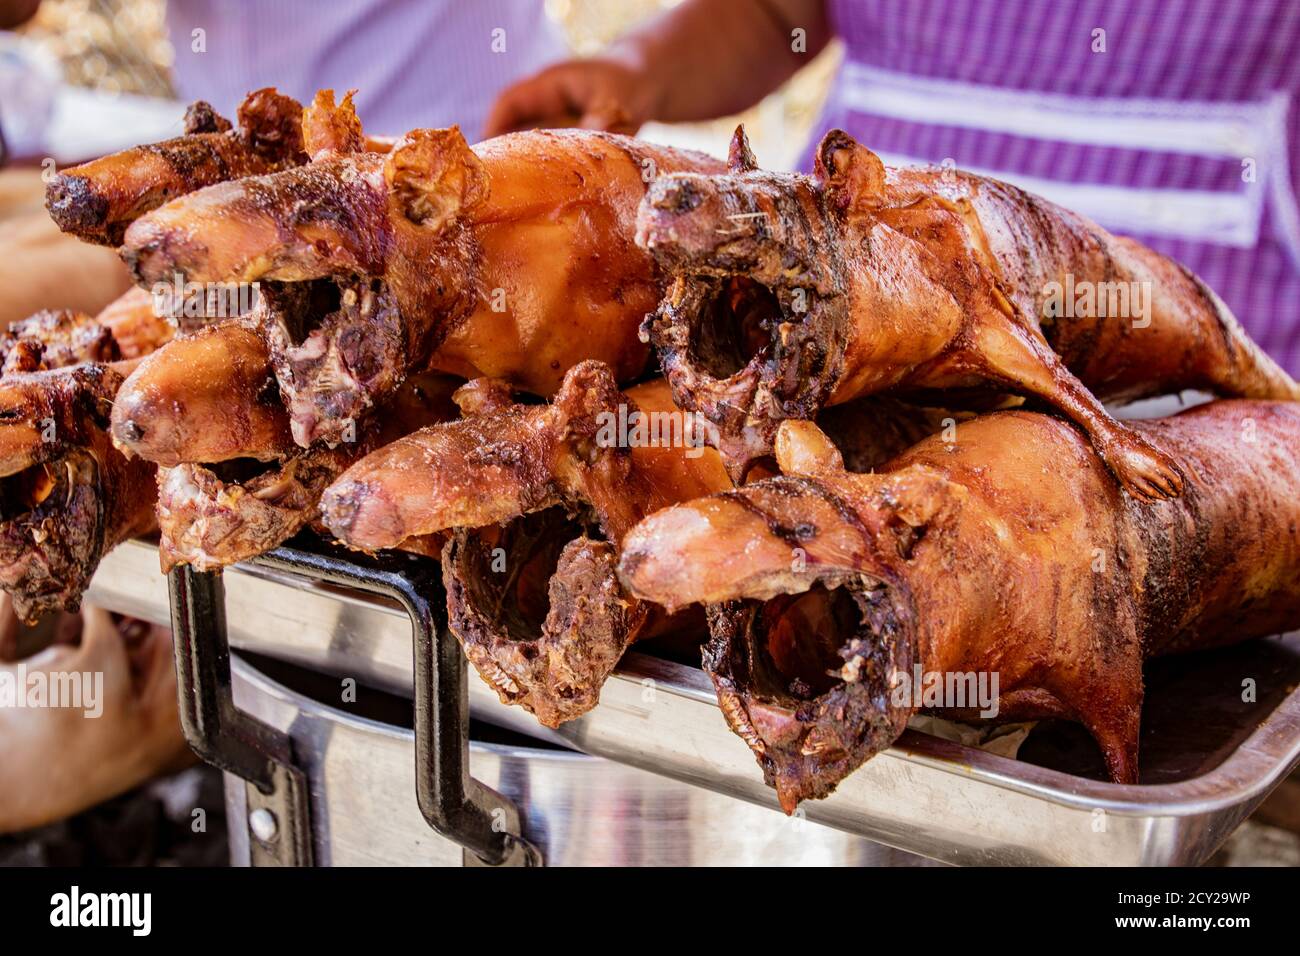 Cuy guinea pig roasted and ready to eat as a delicacy in Ecuador Stock Photo